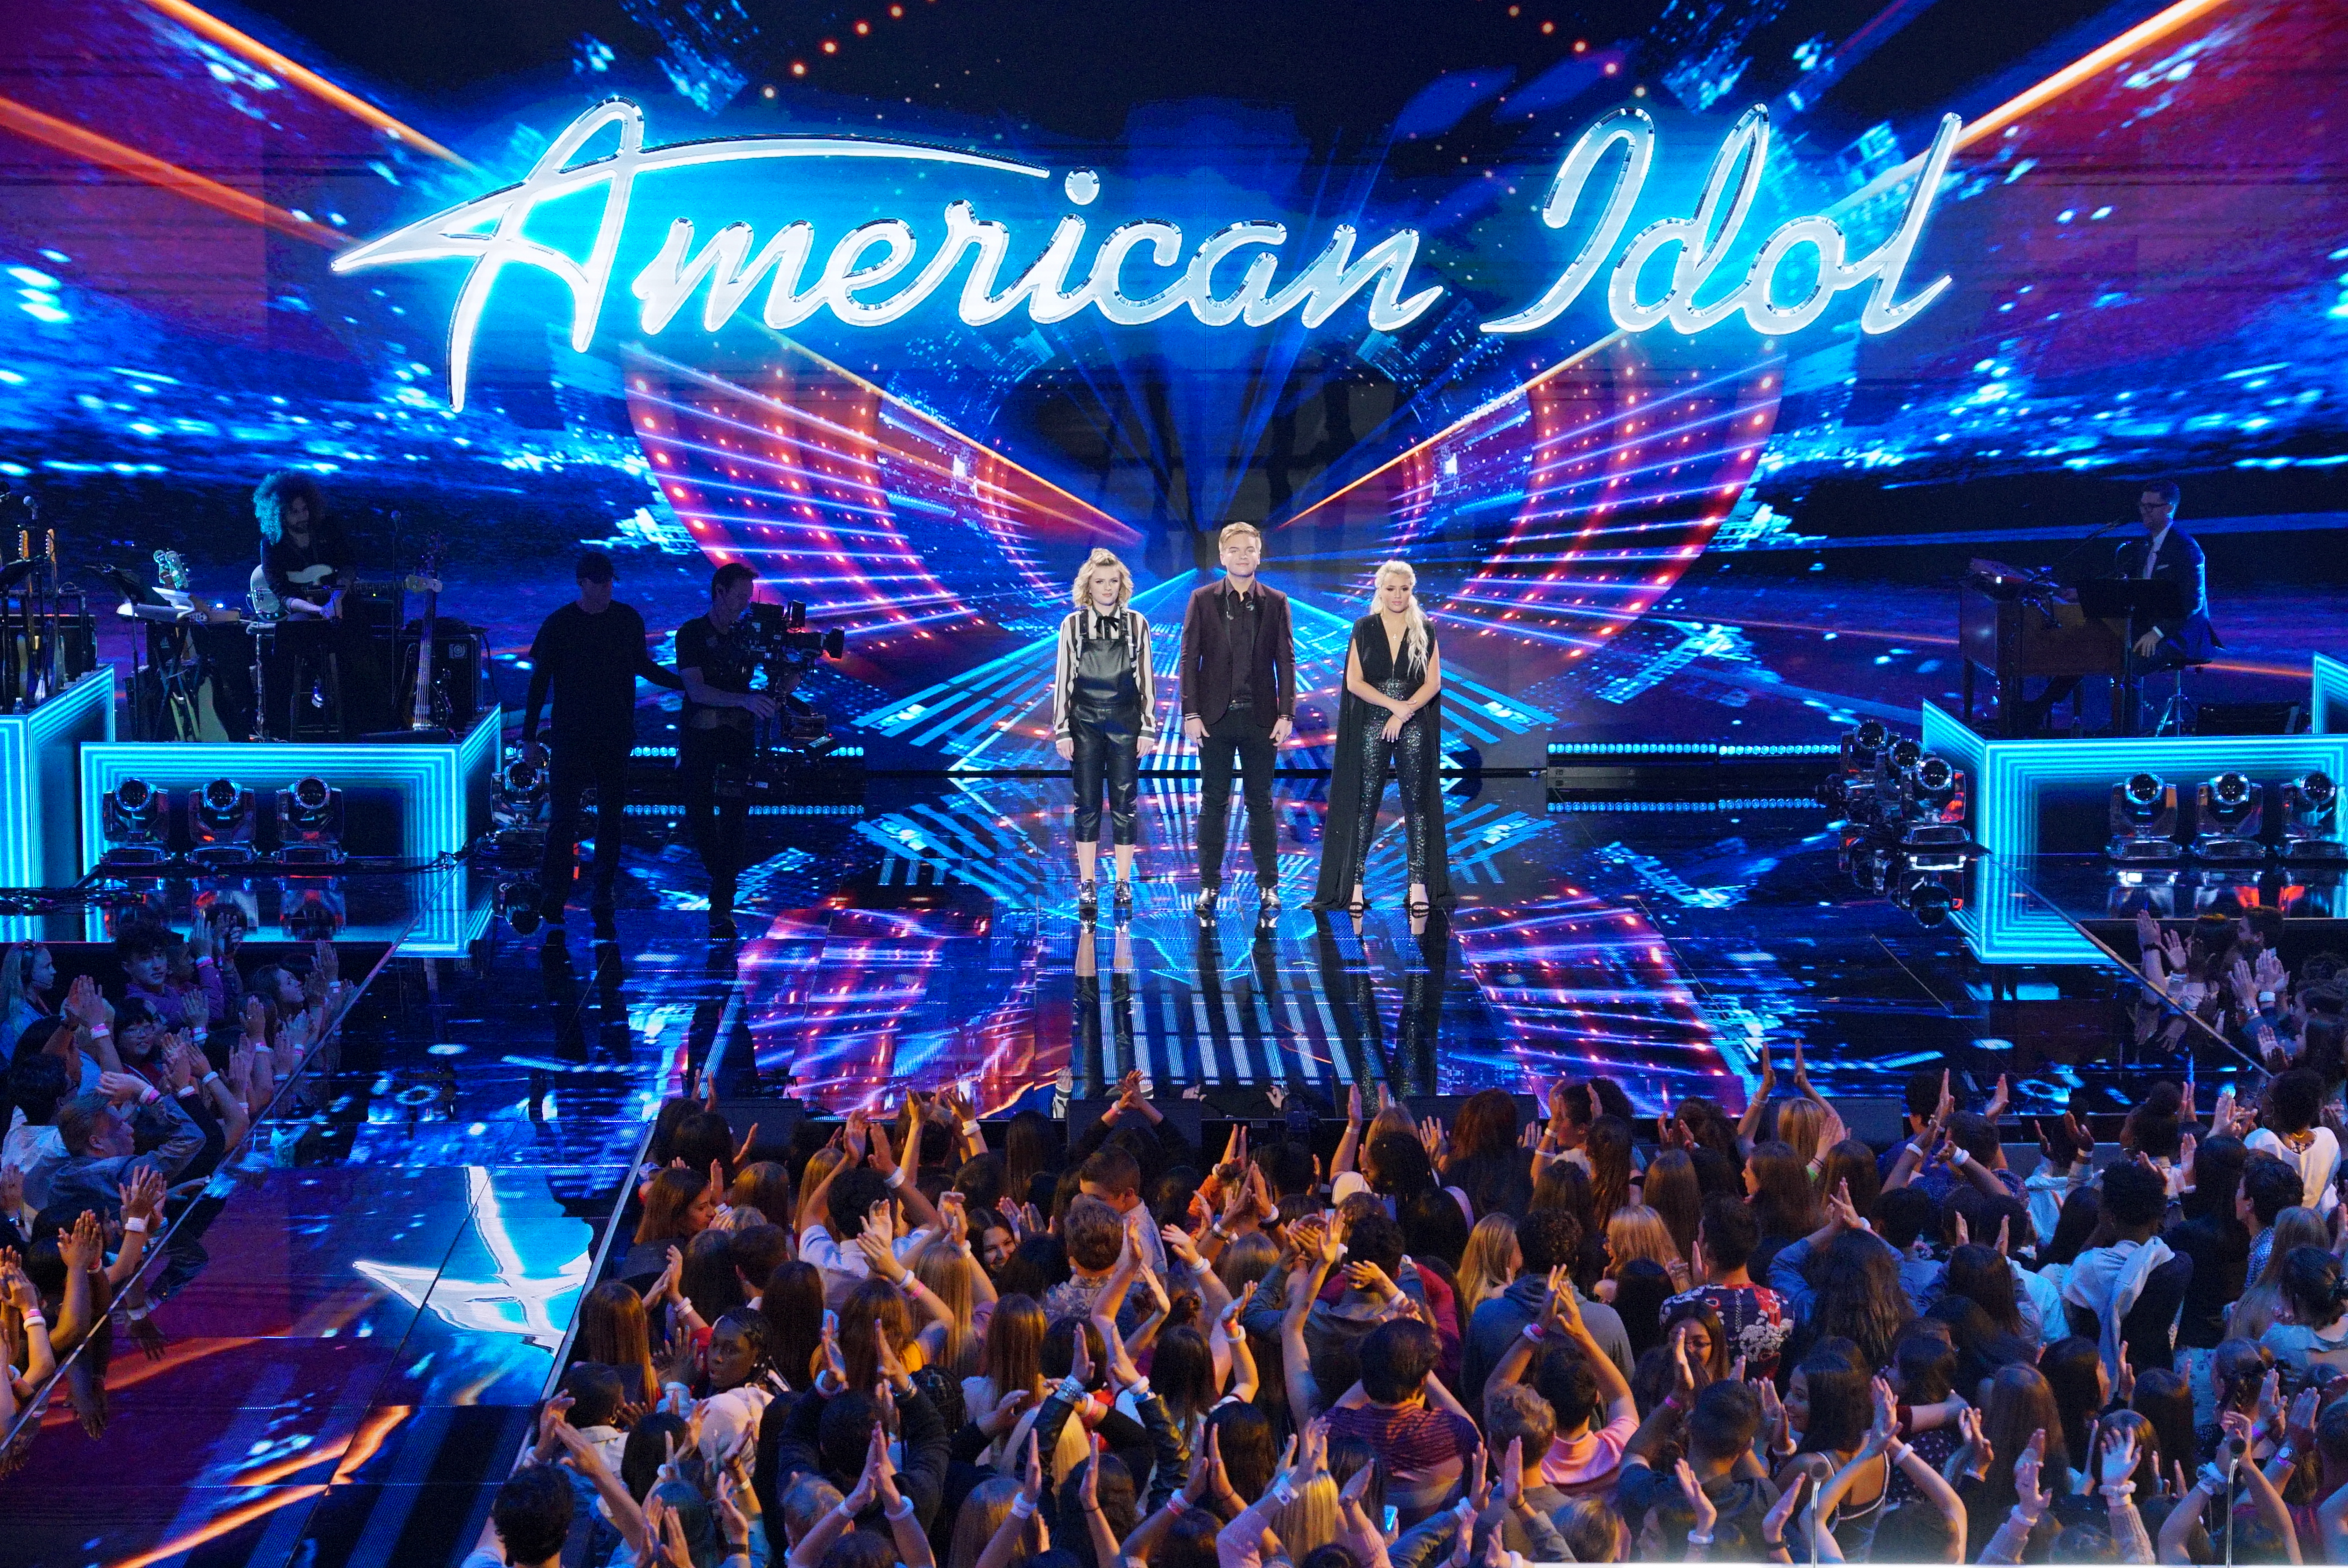 Maddie Poppe, Caleb Lee Hutchinson, and Gabby Barrett on American Idol which aired on ABC on May 20, 2018.
Photo credit: American Idol
